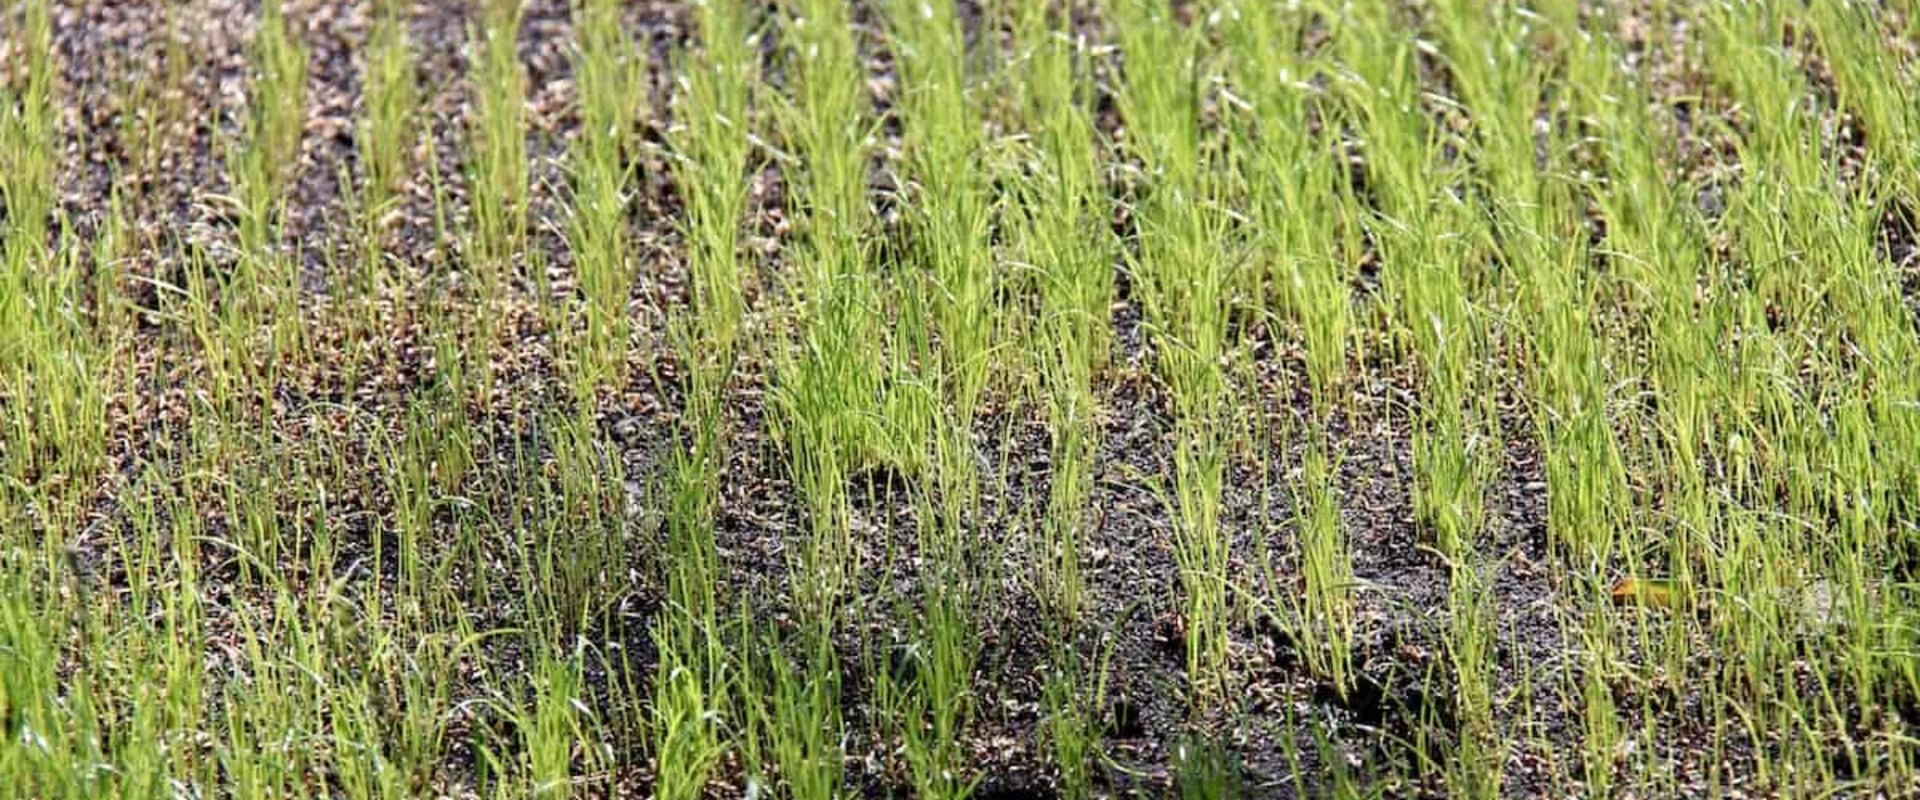 How long does it take for grass seeds to germ?